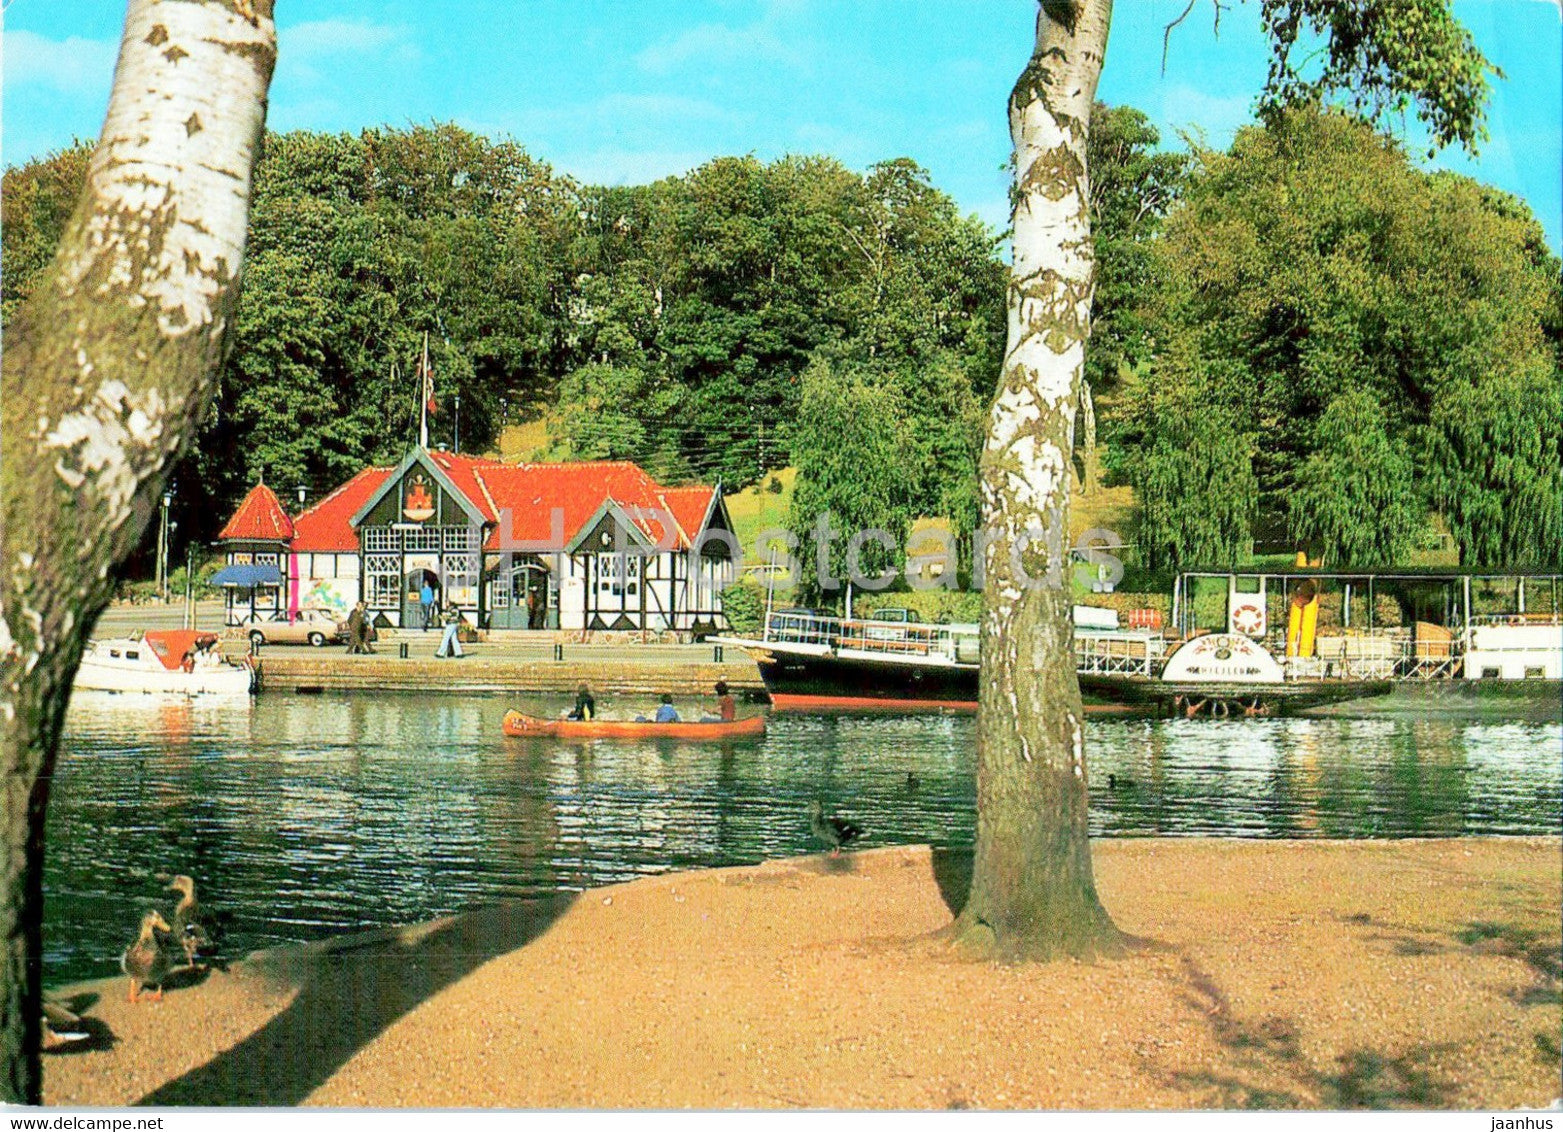 Silkeborg - The Harbour with the old steam ferry Hjejlen - boat - 1992 - Denmark - used - JH Postcards